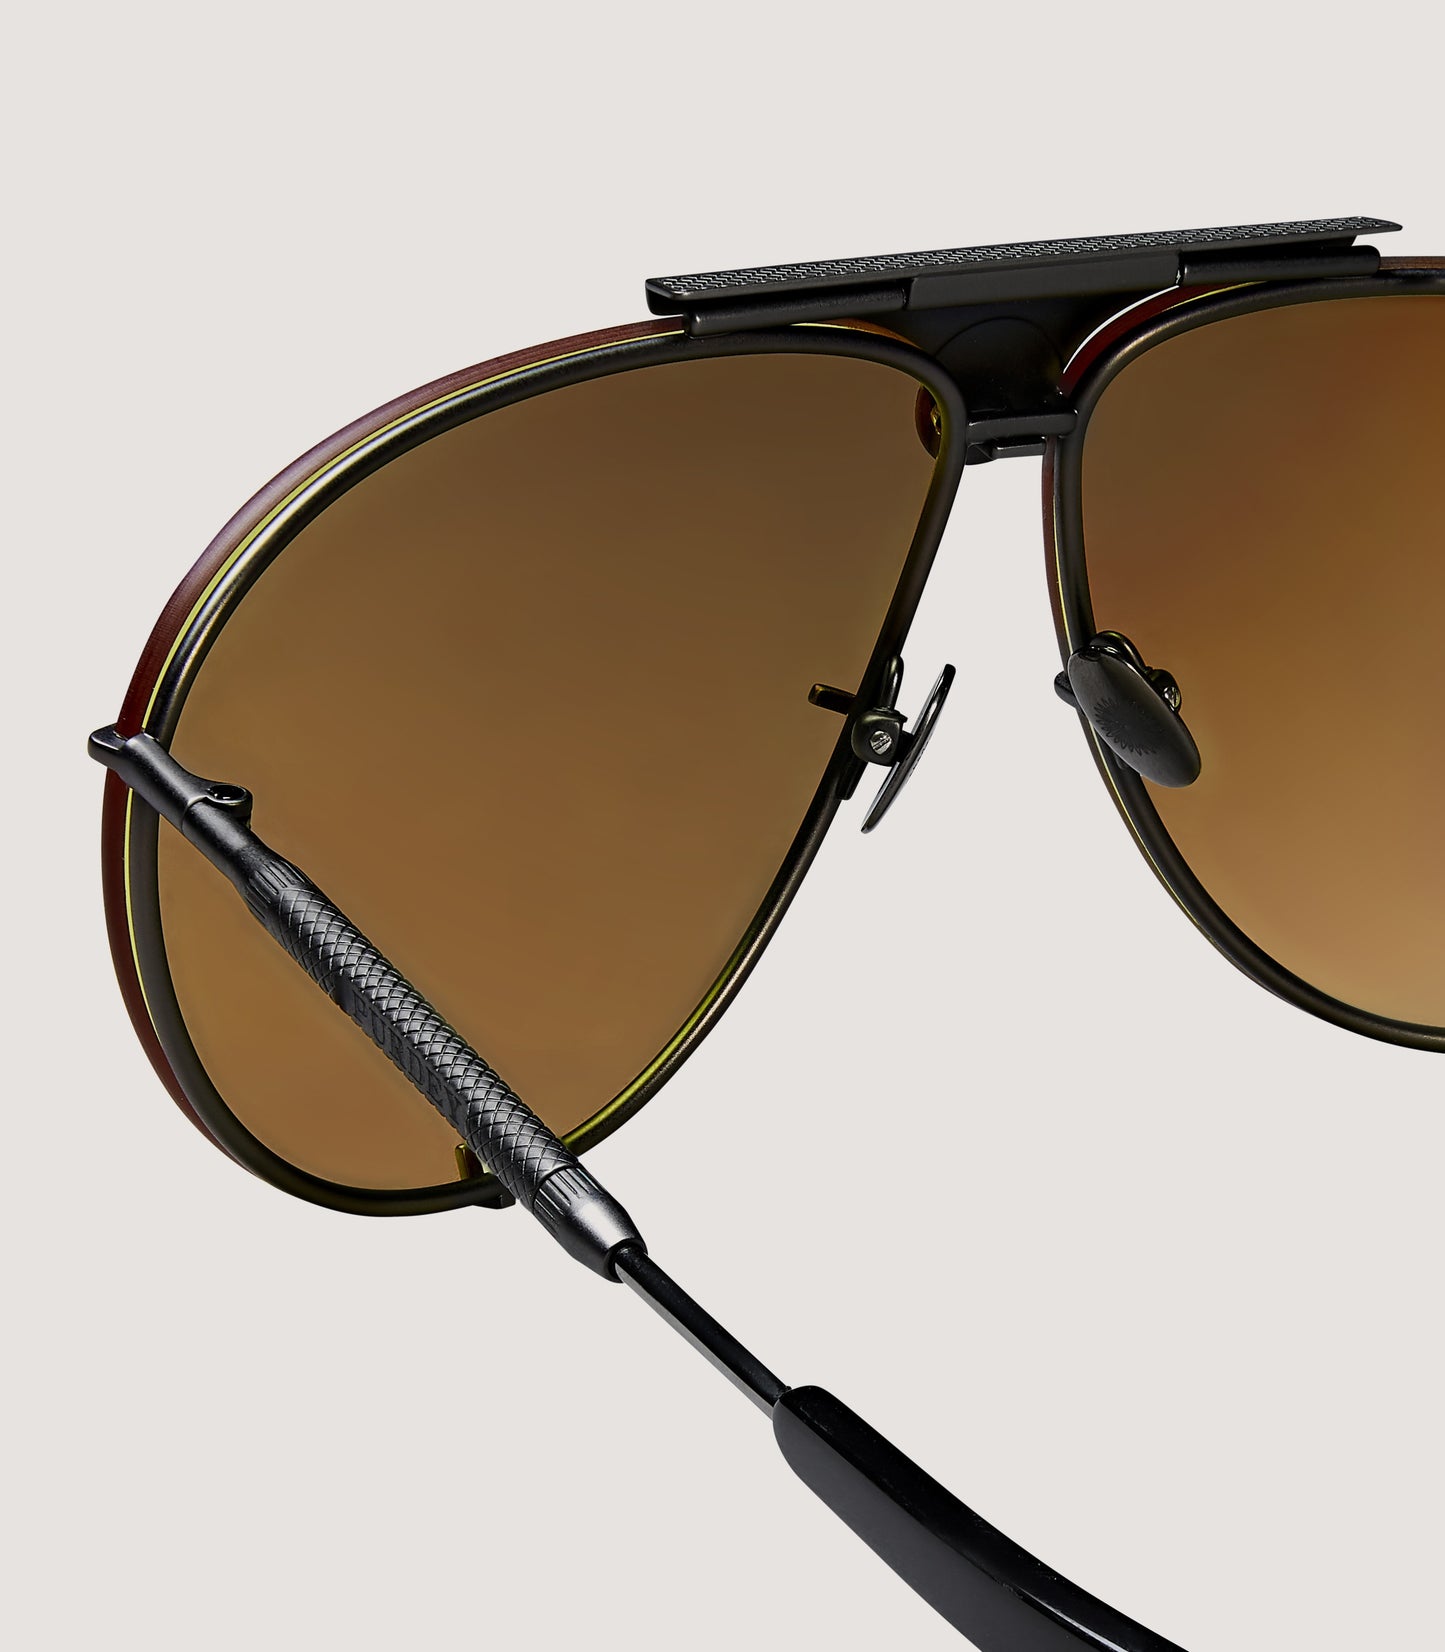 The Sporter Sunglasses In Natural